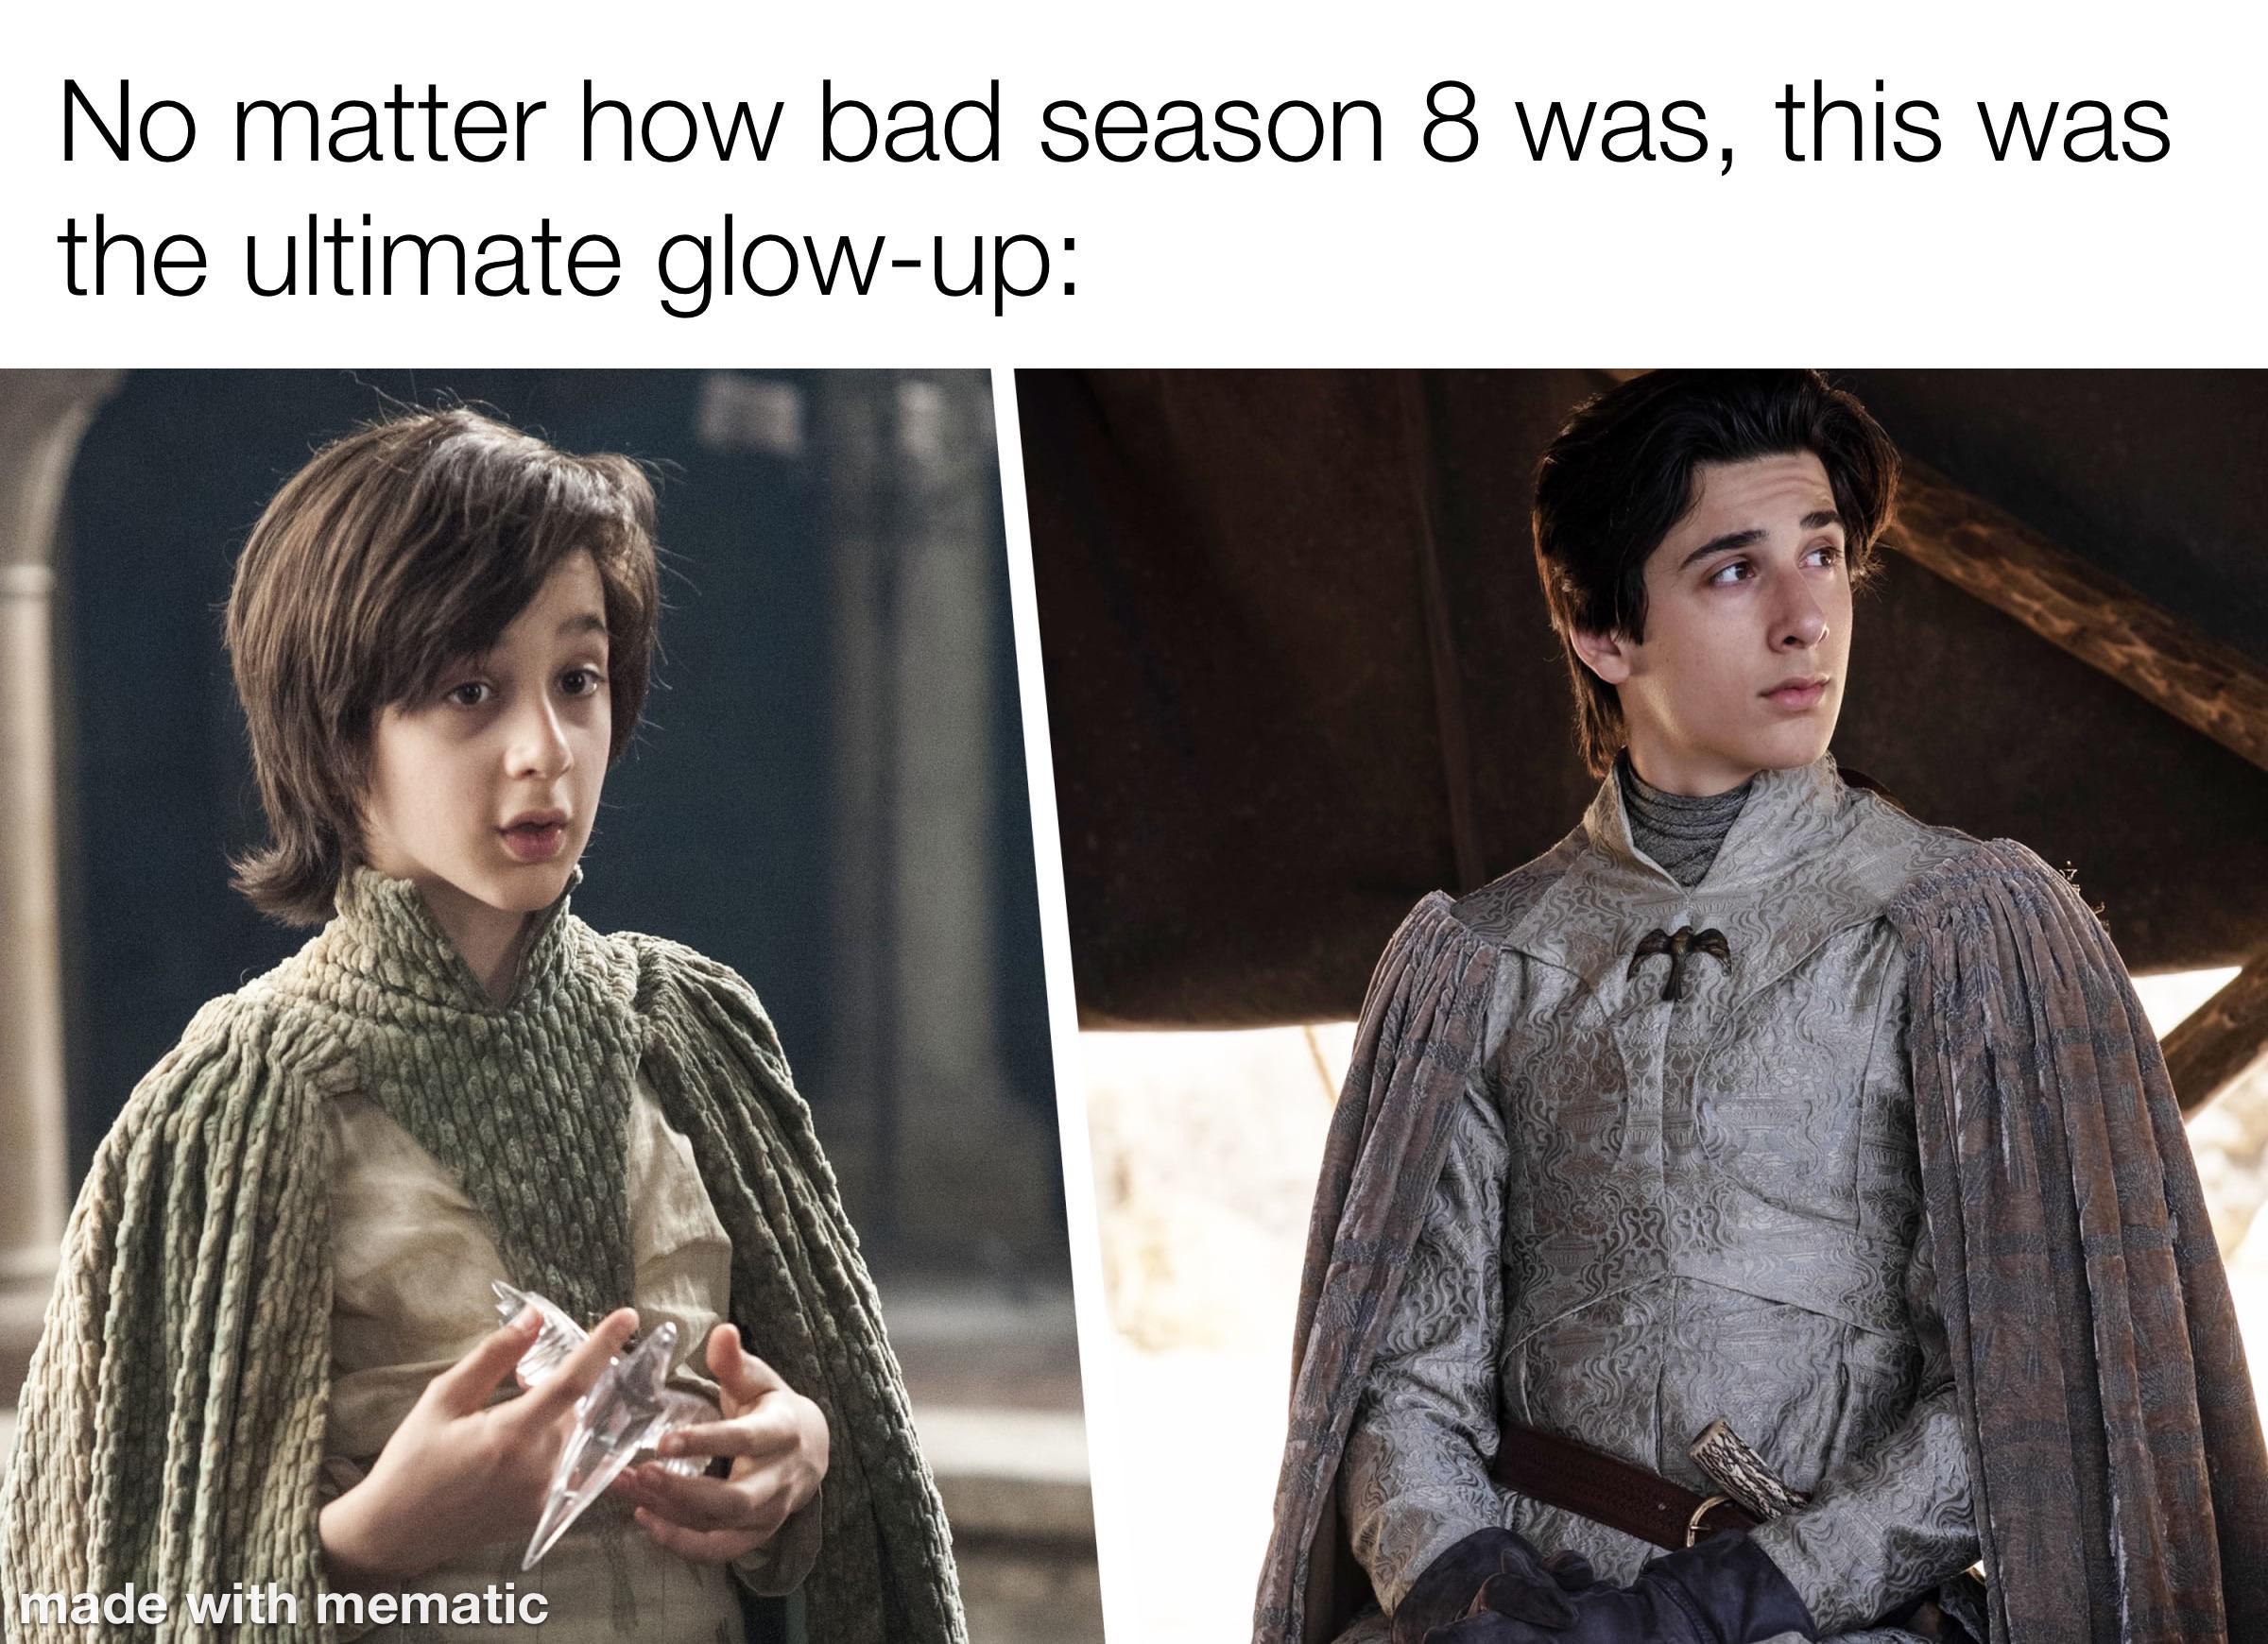 Game of thrones, Bran, Vale, Sean Astin, Sam, Neville Longbottom Game of thrones memes Game of thrones, Bran, Vale, Sean Astin, Sam, Neville Longbottom text: No matter how bad season 8 was, this was the ultimate glow-up: d i, mematic 